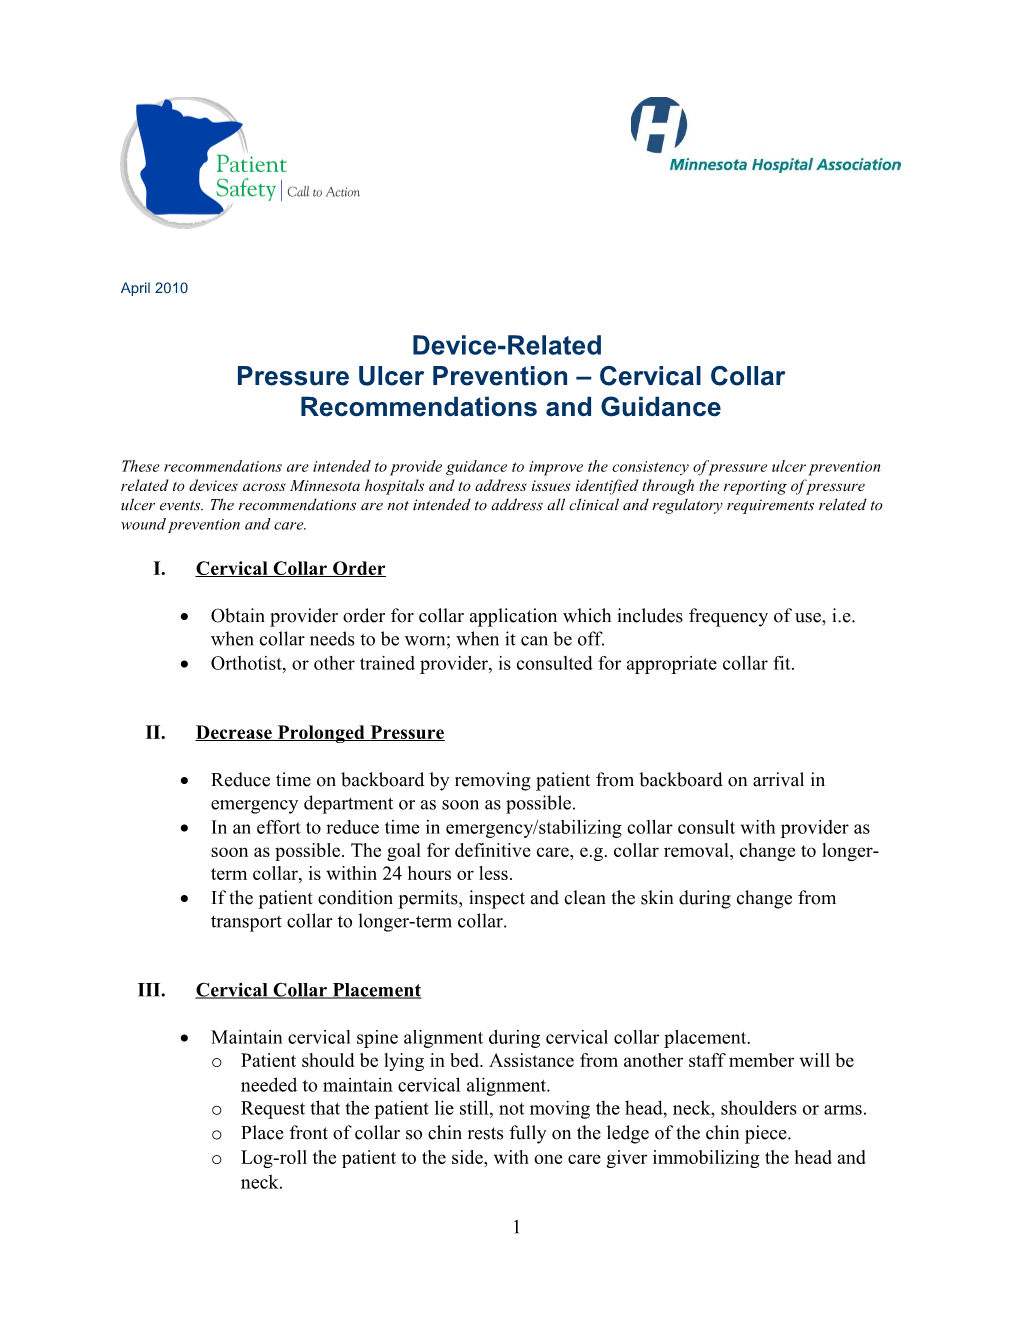 Device-Related Pressure Ulcer Prevention Cervical Collar